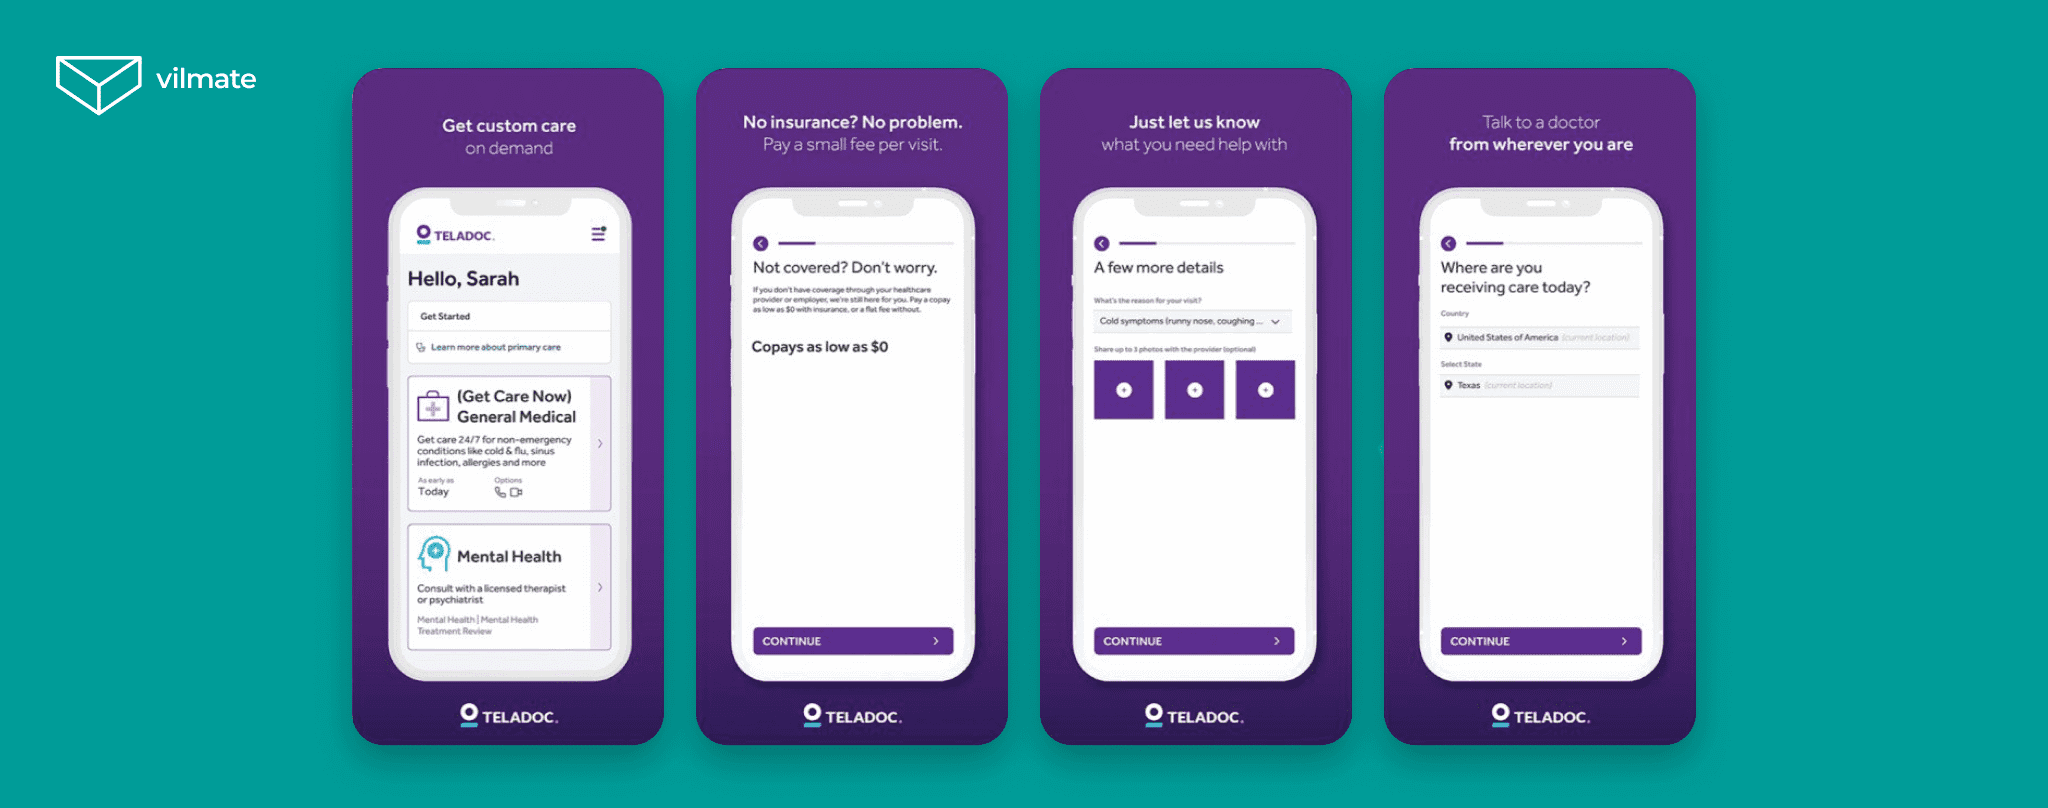 Example of a simple healthcare app design by Teladoc